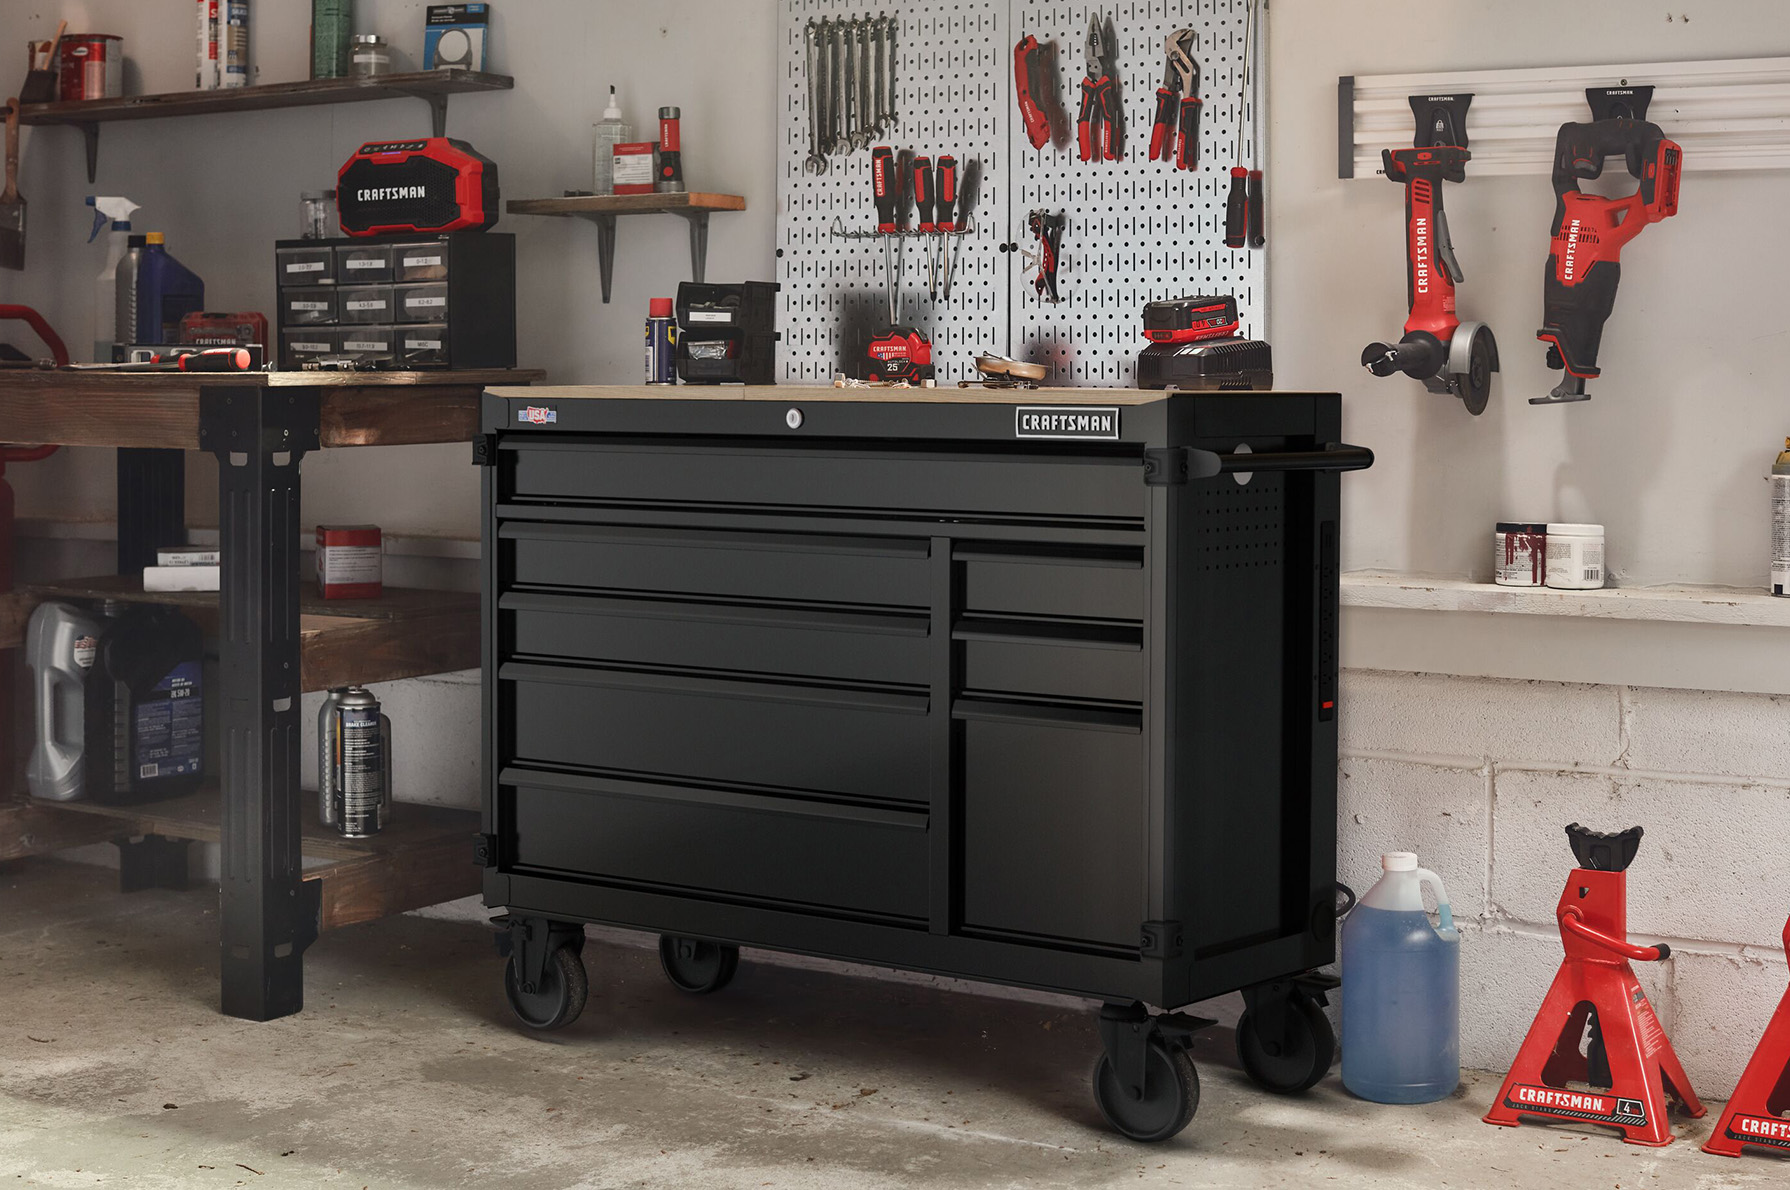 How to Make a Tool Storage Cabinet with Charging Station - ToolBox